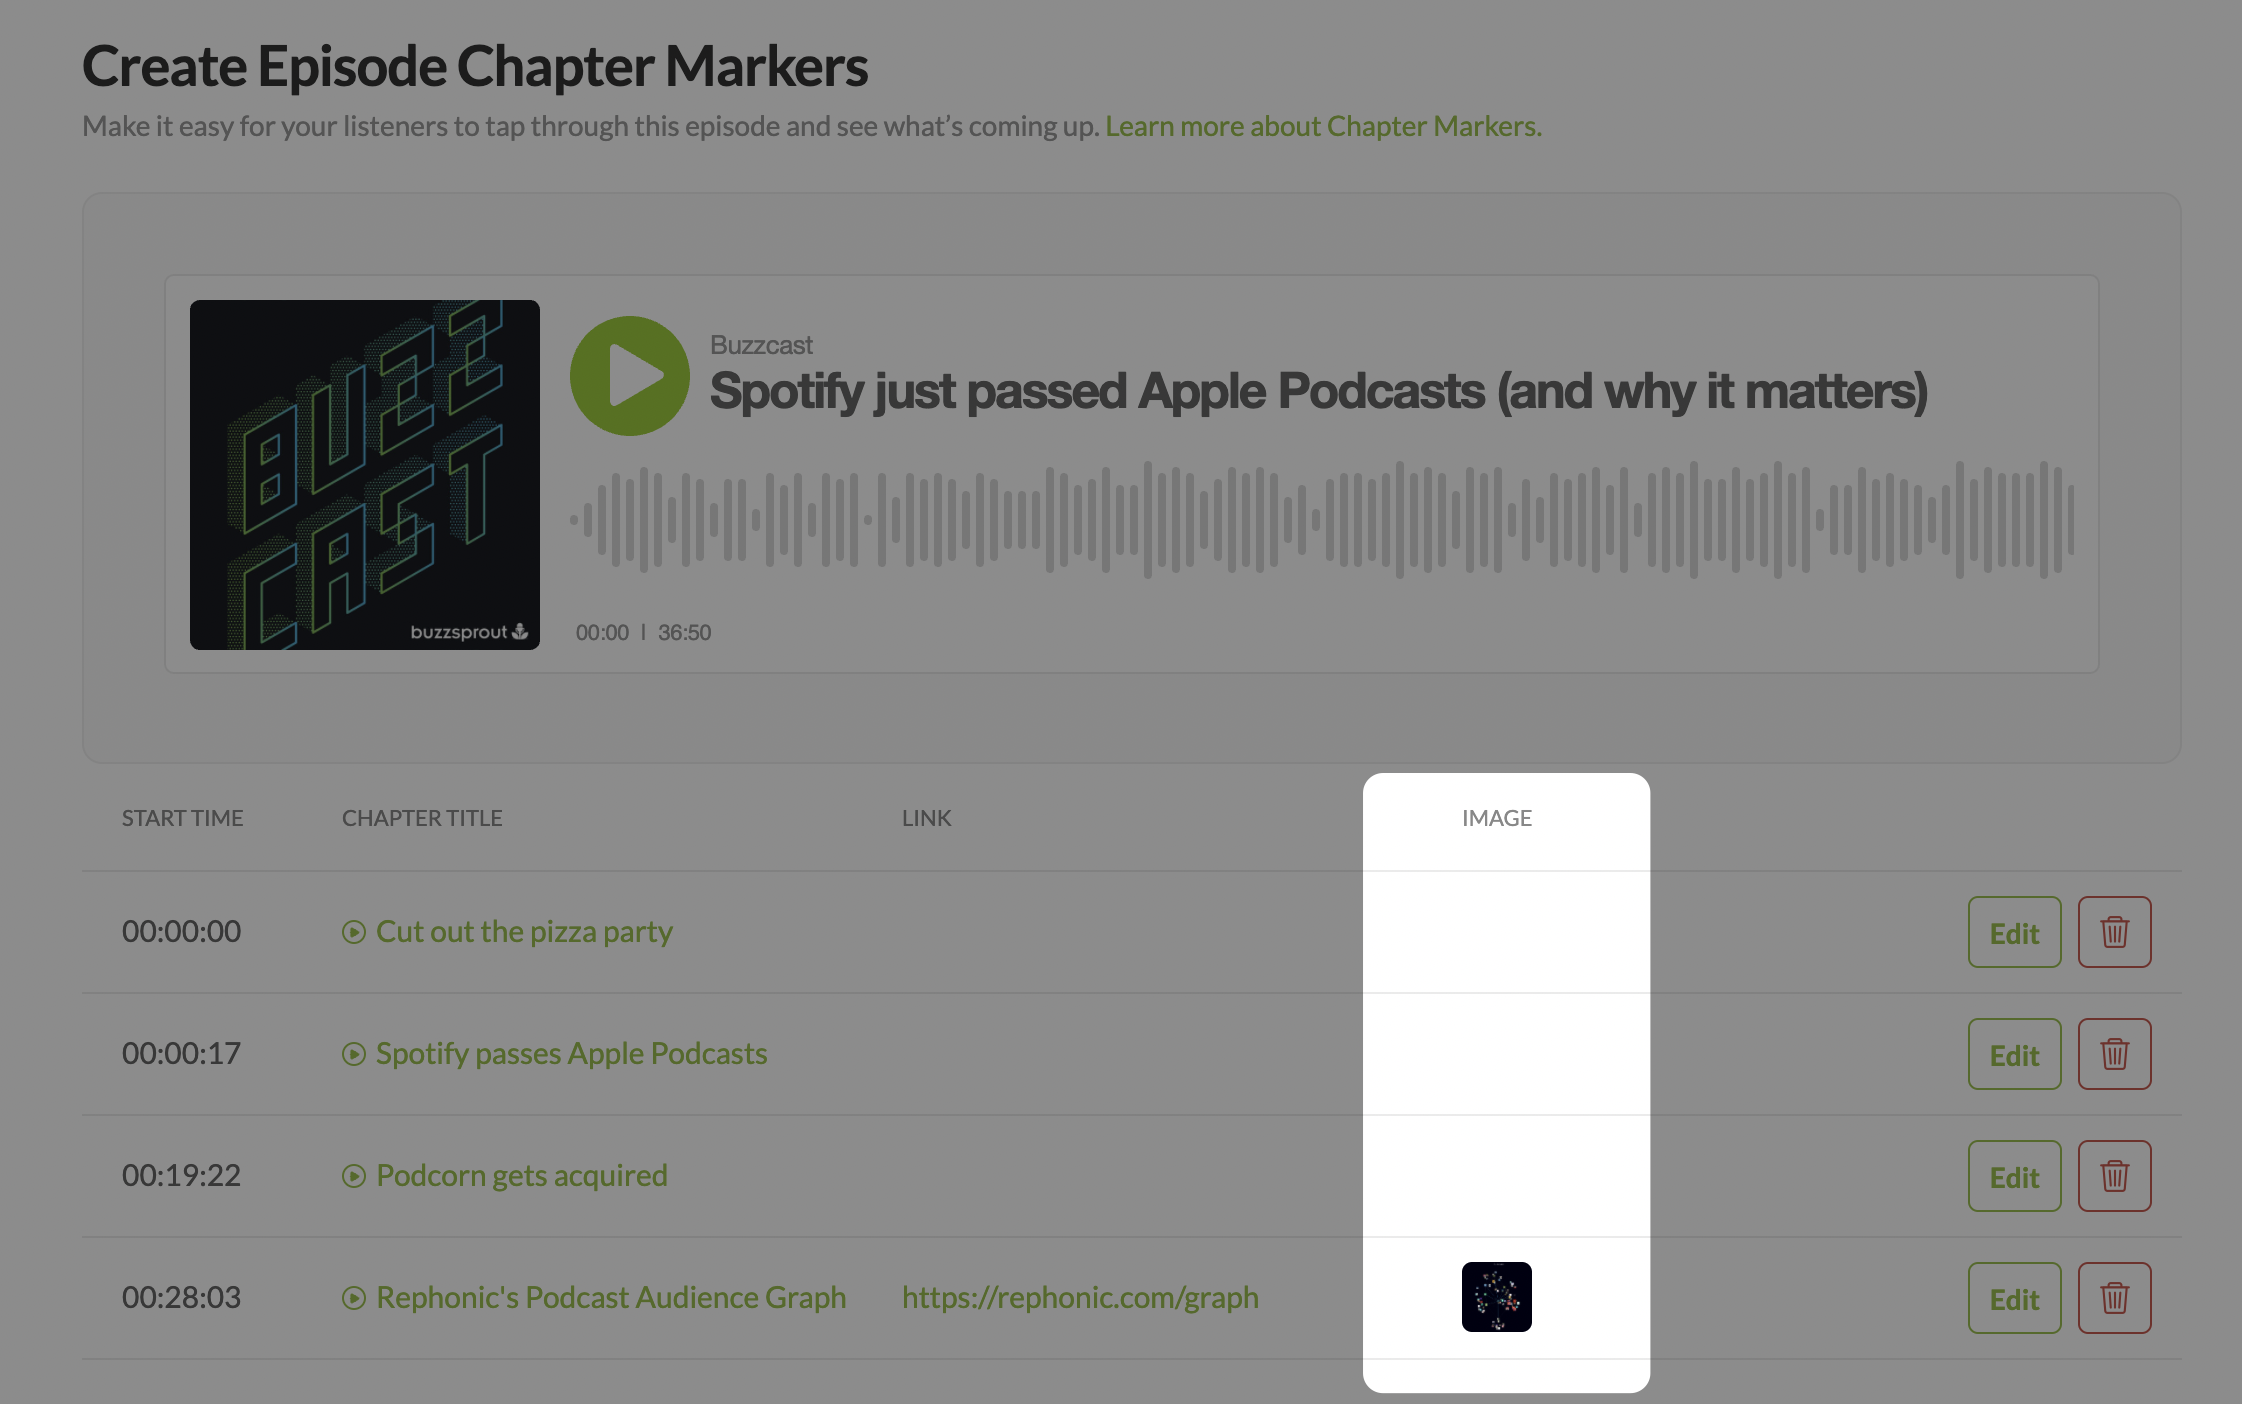 Adding images to podcast chapter marker